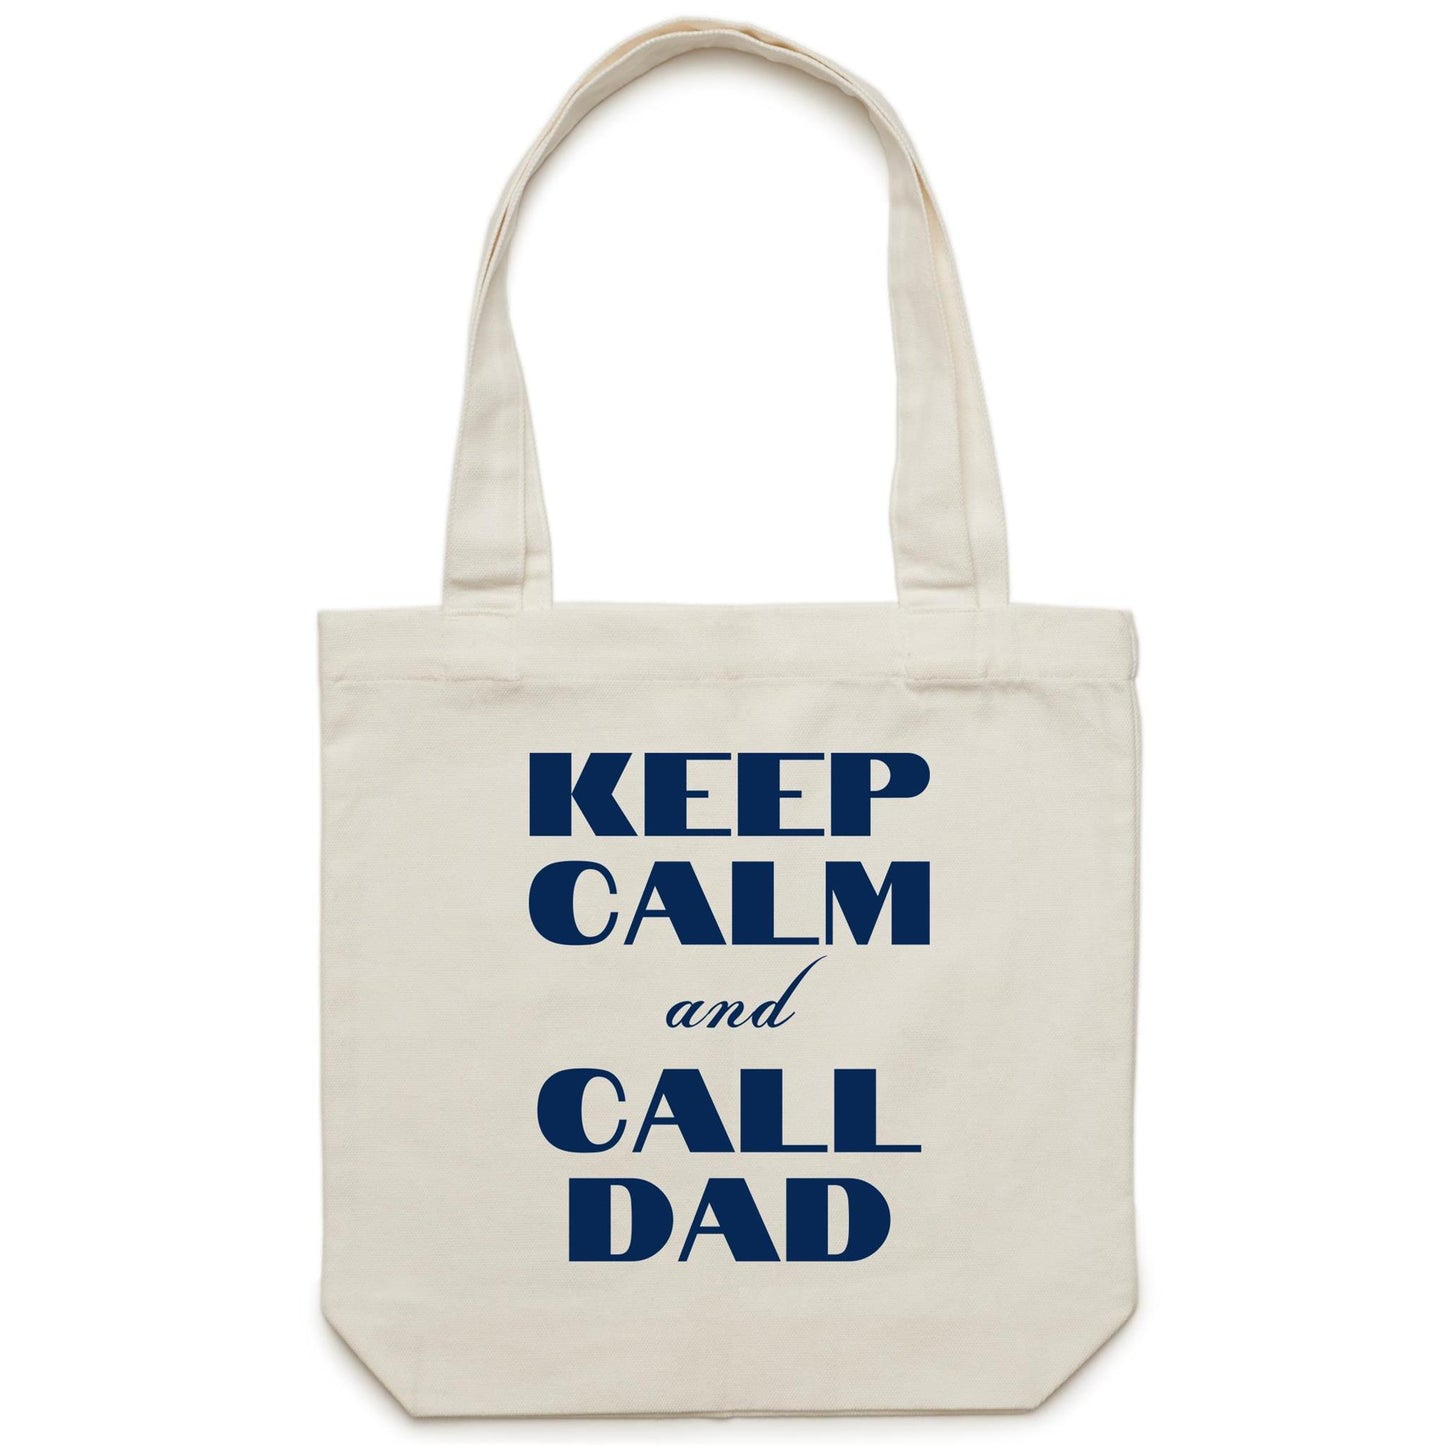 Keep Calm And Call Dad - Canvas Tote Bag Default Title Tote Bag Dad